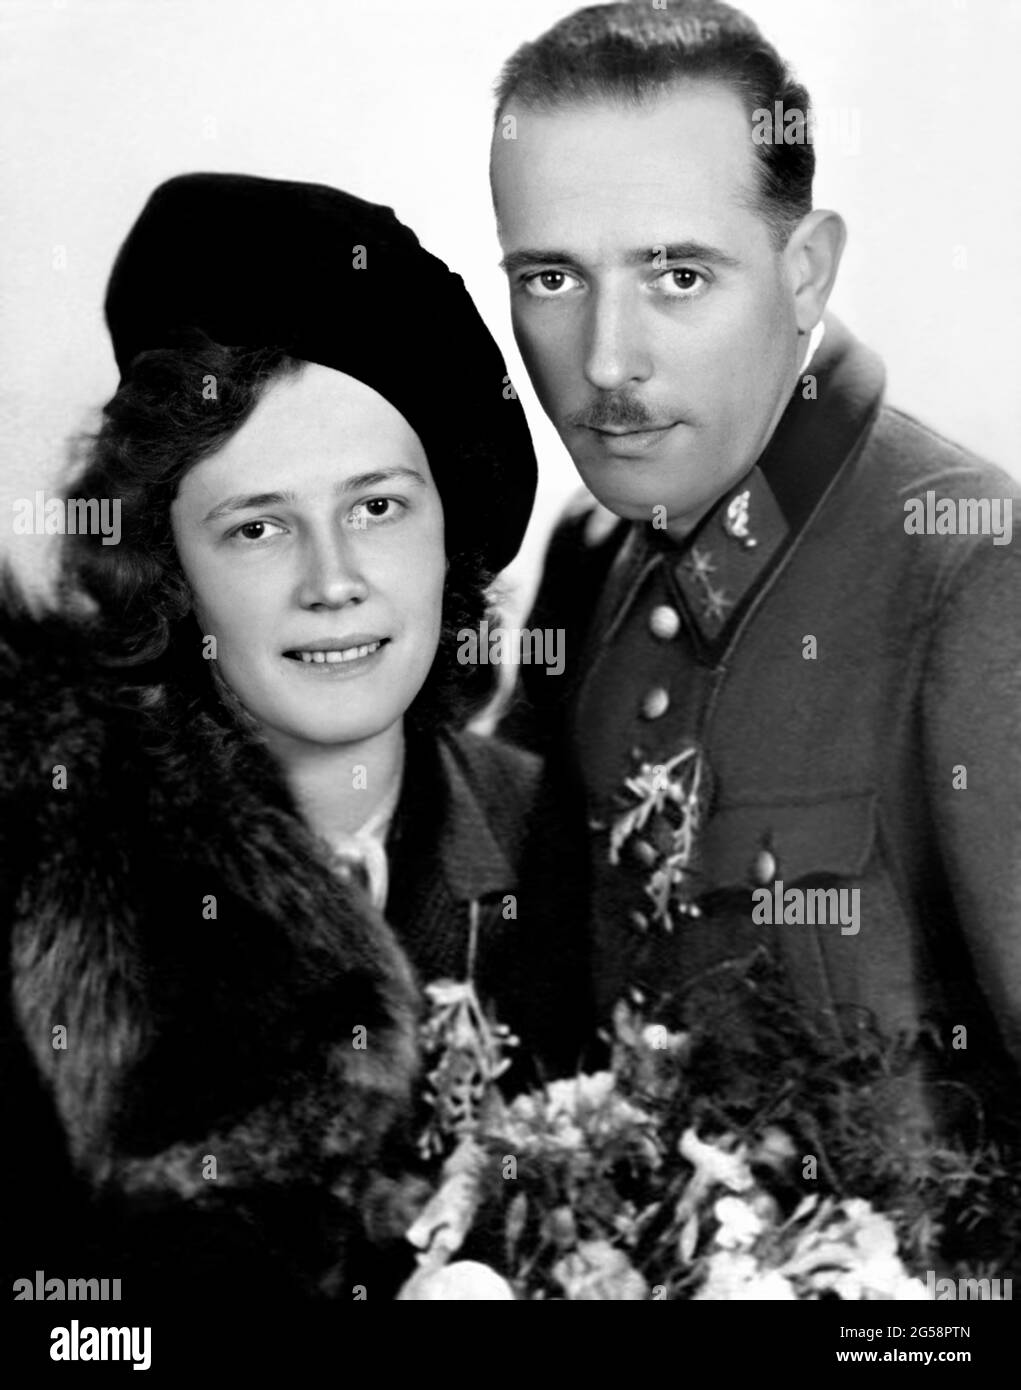 1945 , Thal , AUSTRIA : The parents of celebrated austrian-born american actor ARNOLD SCHWARZENEGGER ( born 30 july 1947 ) the day of marriage October 20 , 1945 : AURELIA JADRNY ( 1922 - 1998 ) and in military uniform of Gendarmerie-Kommandant Police GUSTAV SCHWARZENEGGER ( 1907 - 1972 ) . Arnold is the second son of the couple, after his brother Meinhard ( tragedly dead in car crash in 1971 ). Unknown photographer .- HISTORY - FOTO STORICHE - ATTORE - MOVIE - CINEMA  - smile - sorriso - PORTRAIT - RITRATTO - marito e moglie - padre e madre - father and mother - wife and Husband - GENITORI - m Stock Photo